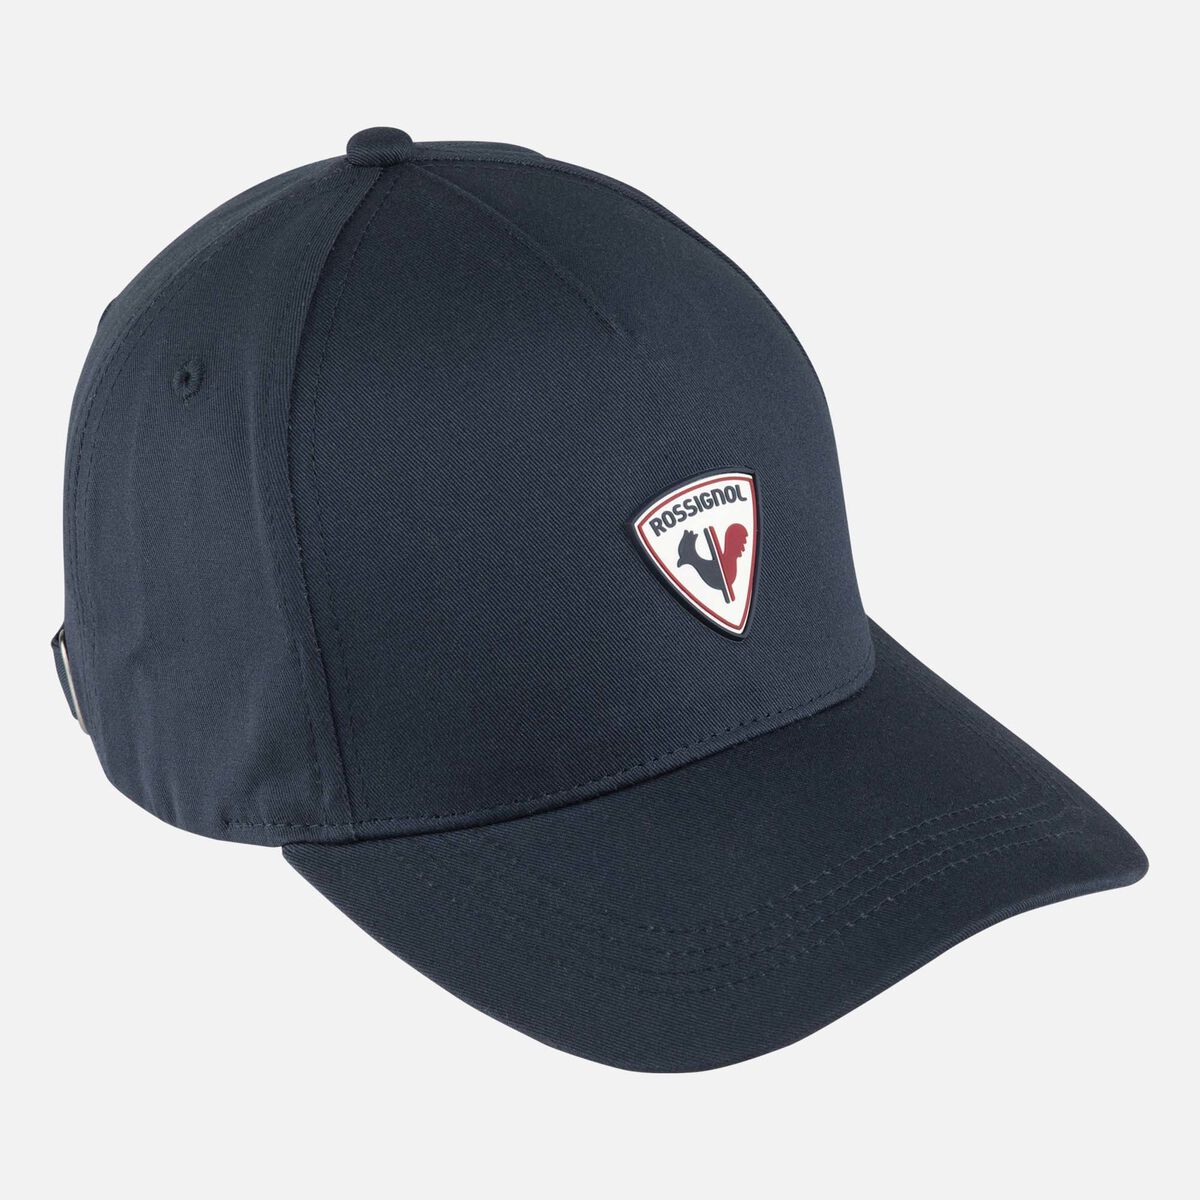 Corporate Rooster Cap